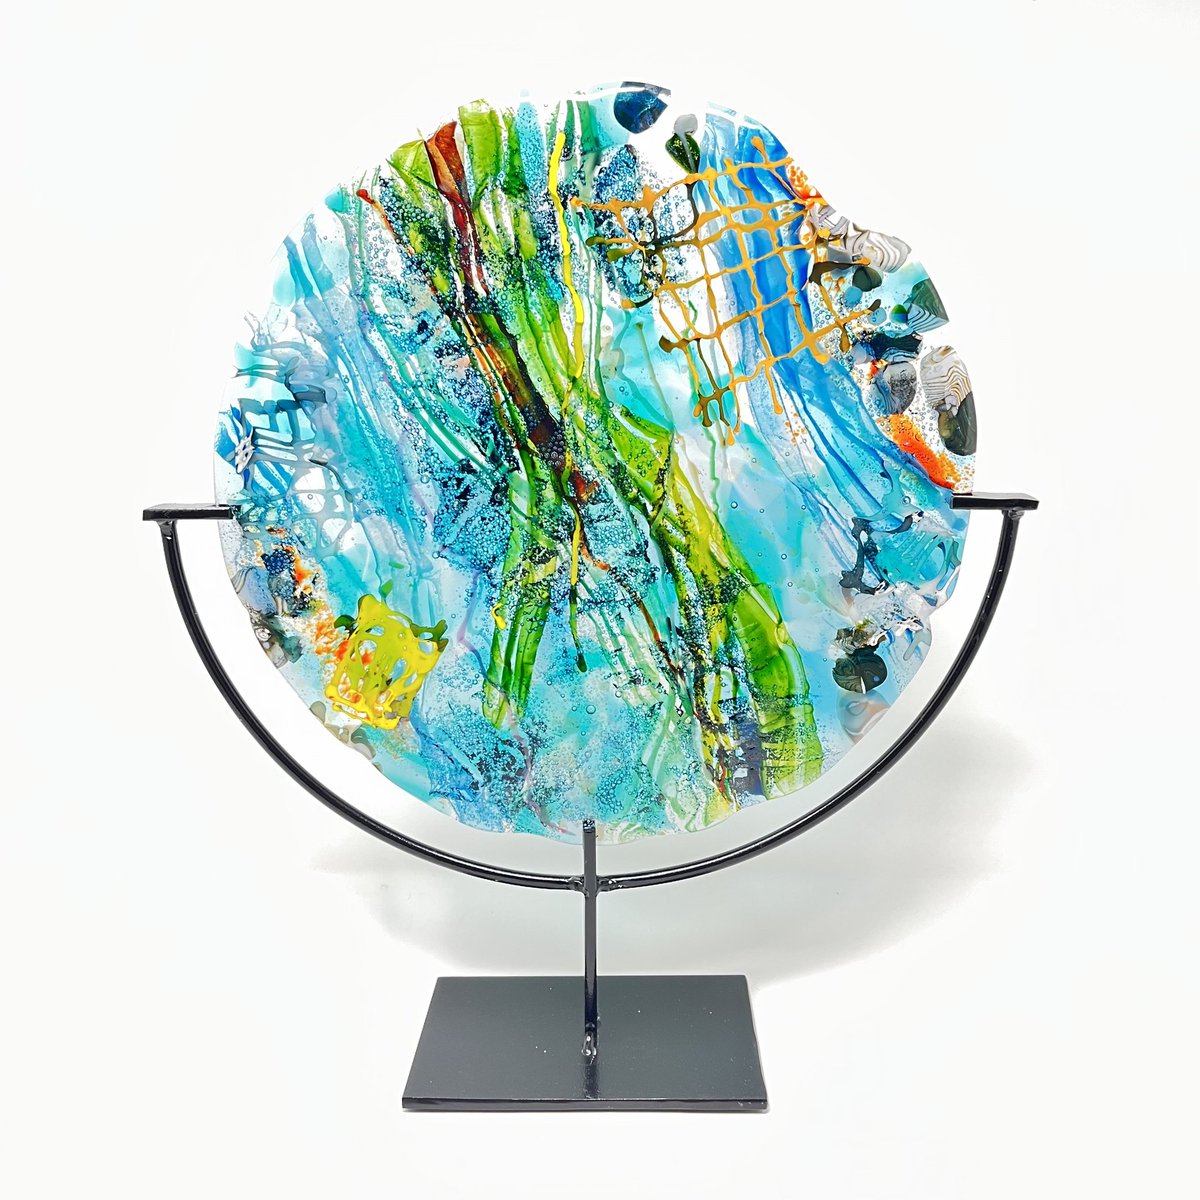 What a fabulous piece is Underwater by Hilary Shields. Fused glass, so evocative of the ocean, standing in a metal frame. #coastalart #southseabeach #inspiredbythesea #seasideliving #seaart #coastline #seascape #glassartists #colouredglass #fusedglassart #tides #water